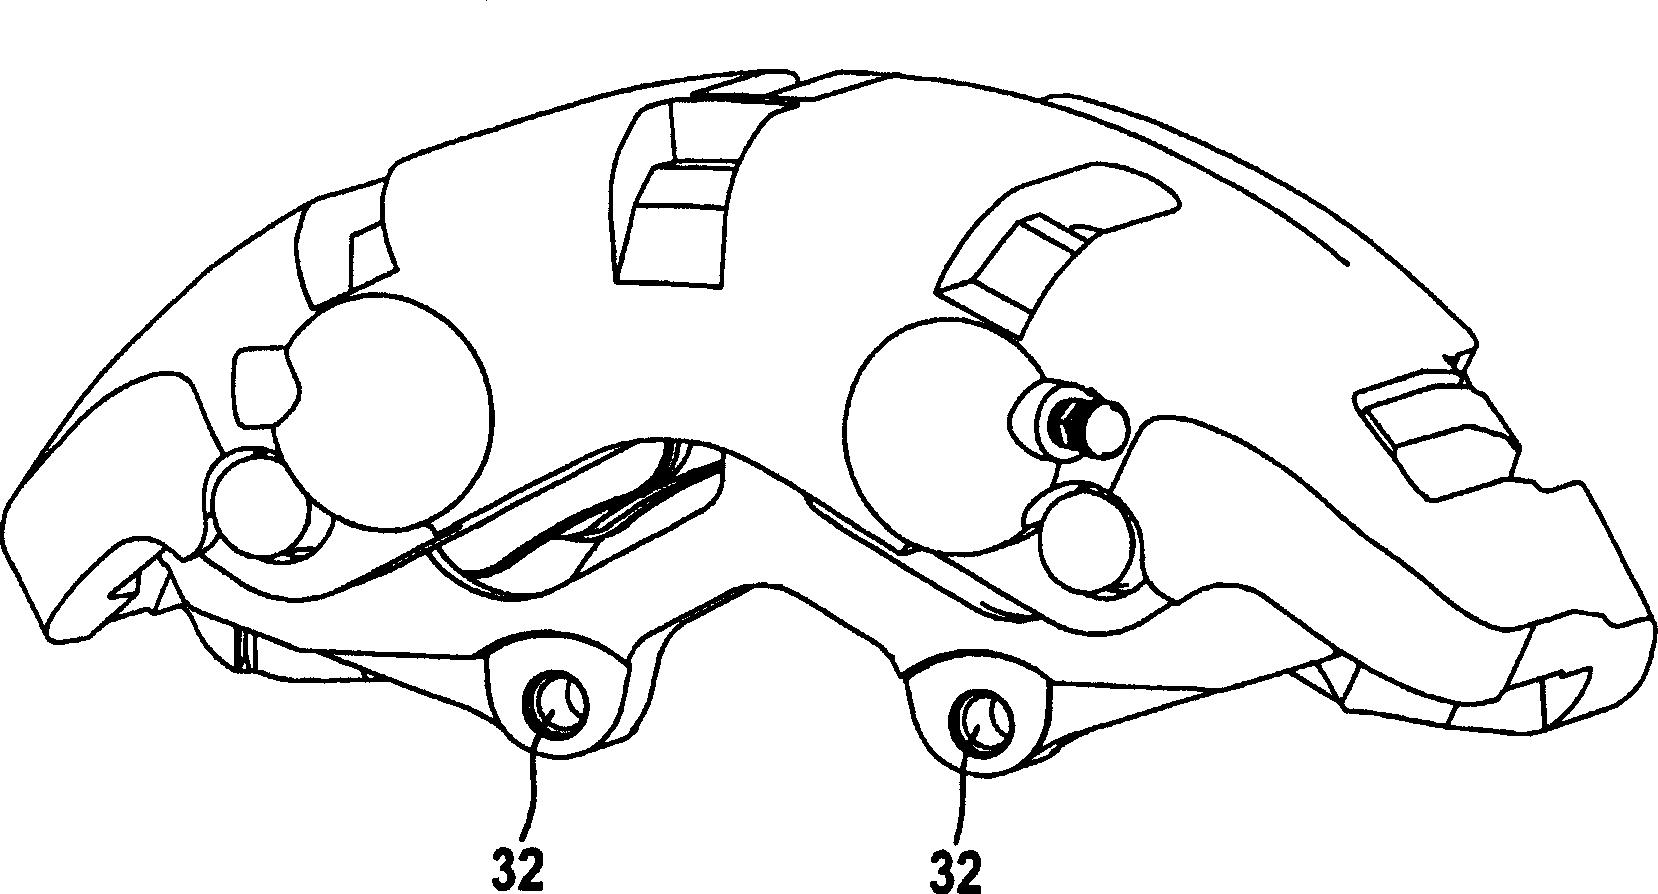 Disc brake equipped with a floating caliper and several outer brake pads directly supported on the brake anchor plate